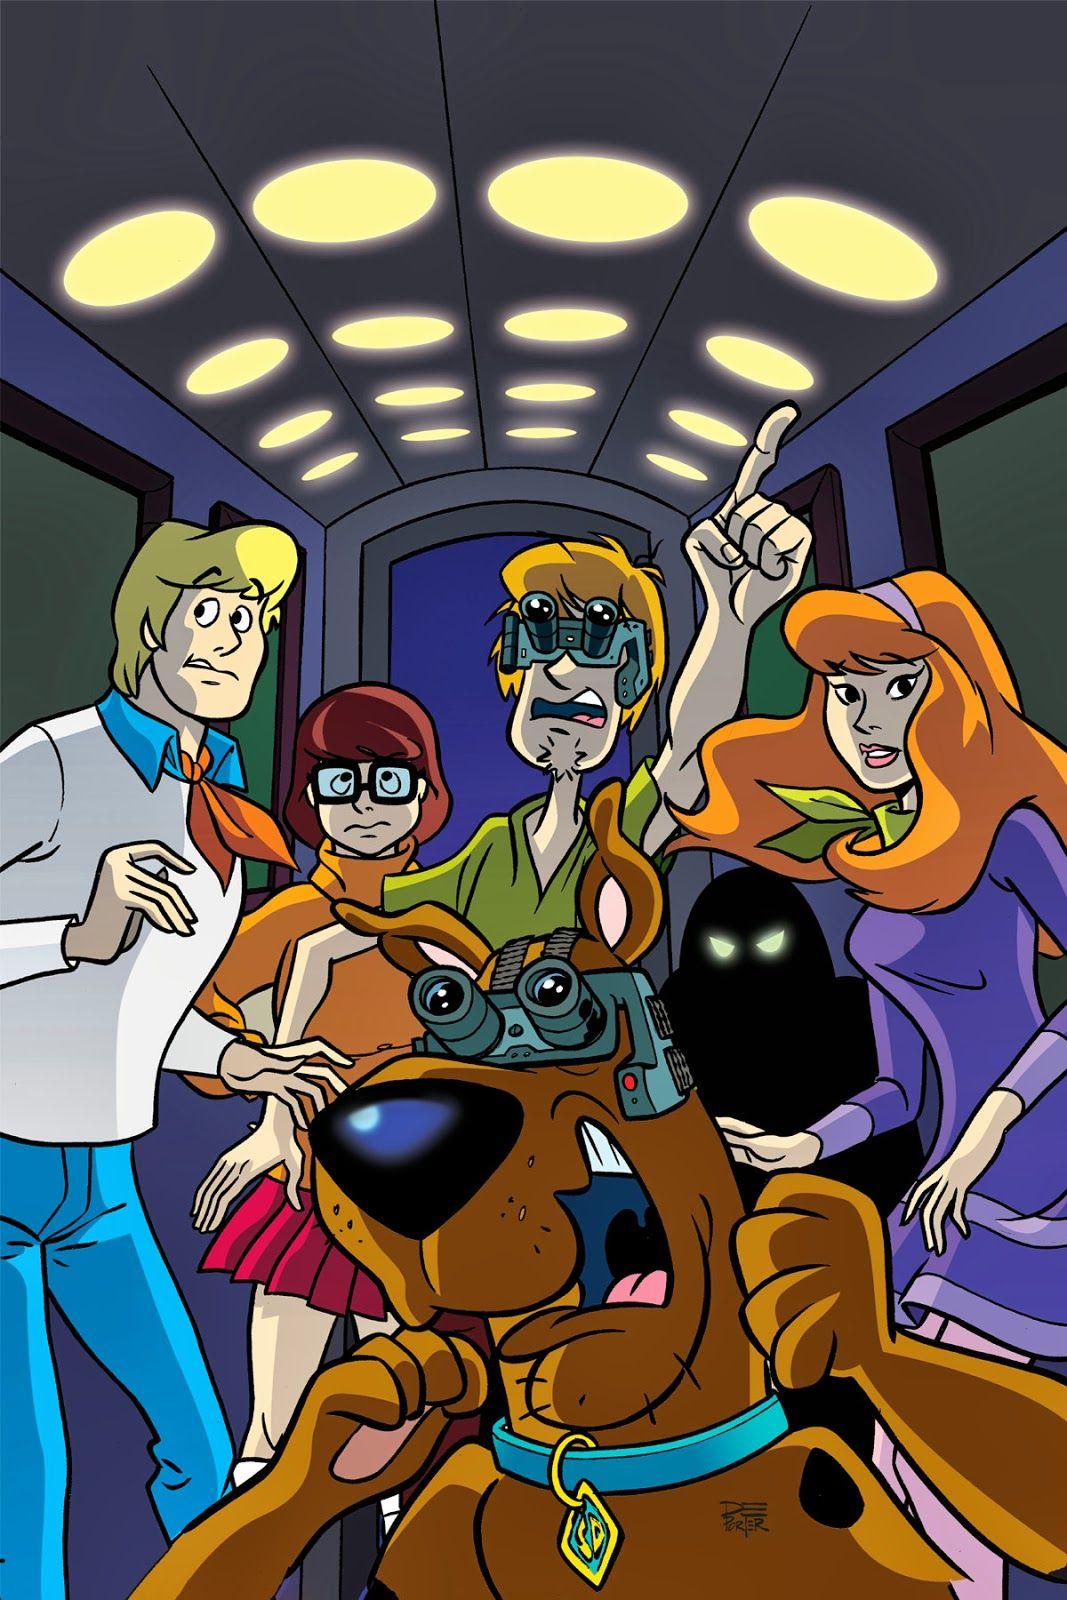 scooby doo where are you iPhone Wallpapers Free Download